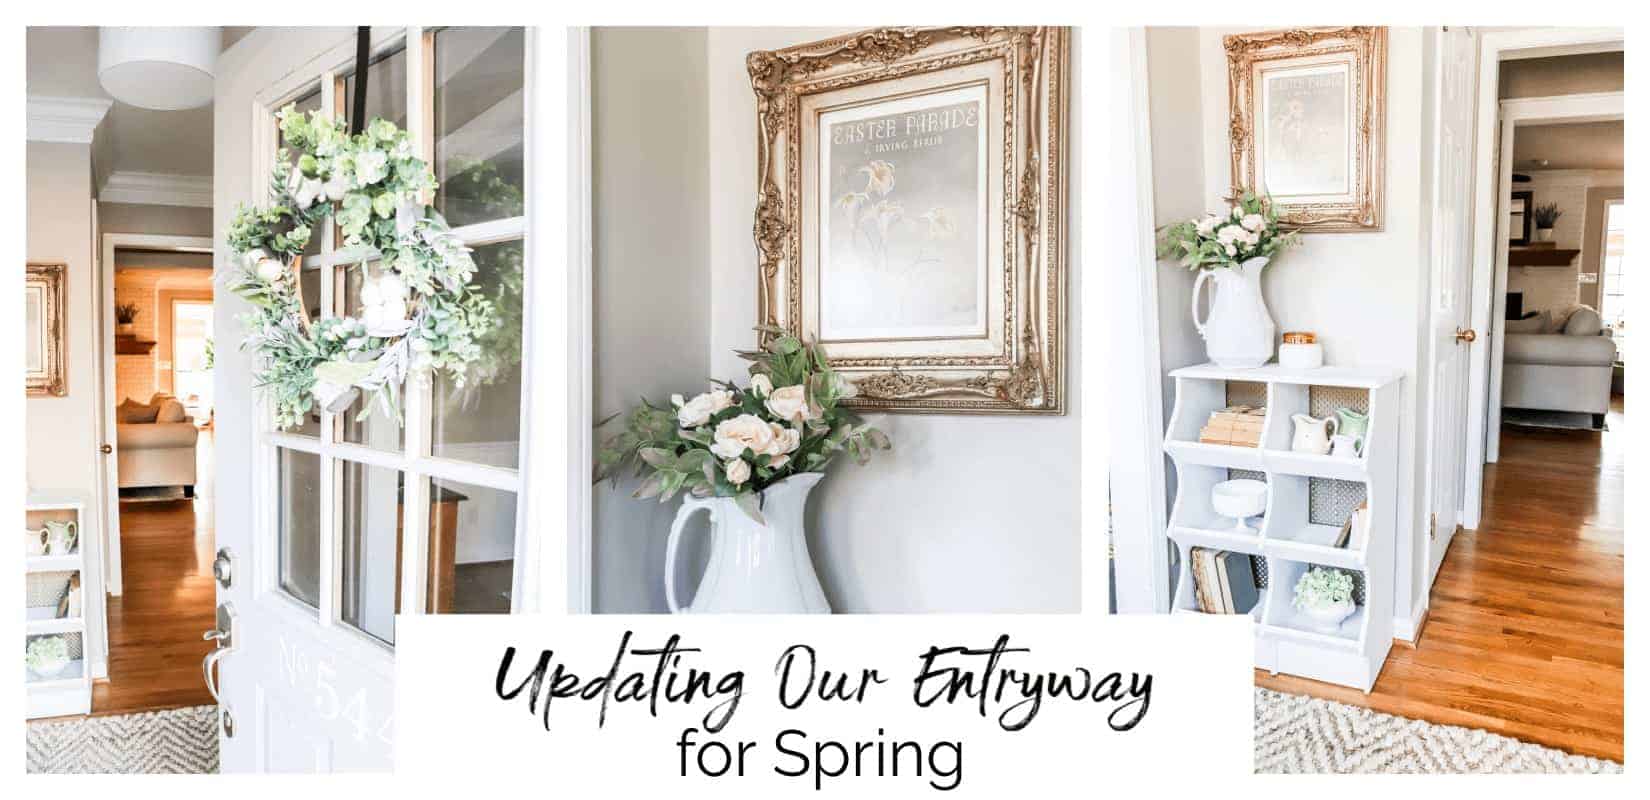 Updating Our Entryway for Spring